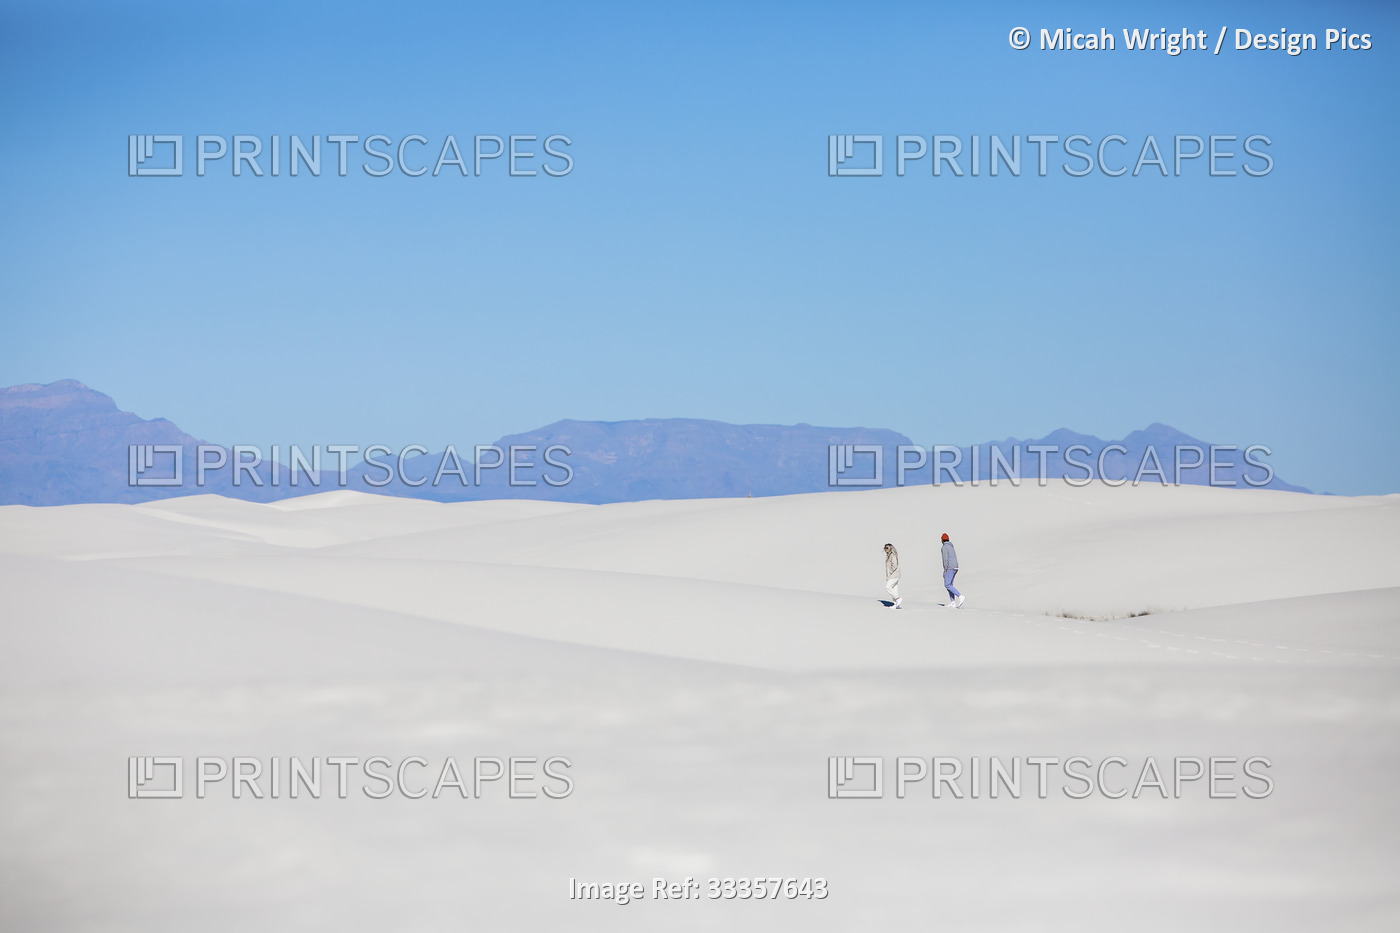 Tourists exploring the beautiful, plain white sands of the dunefields at the ...